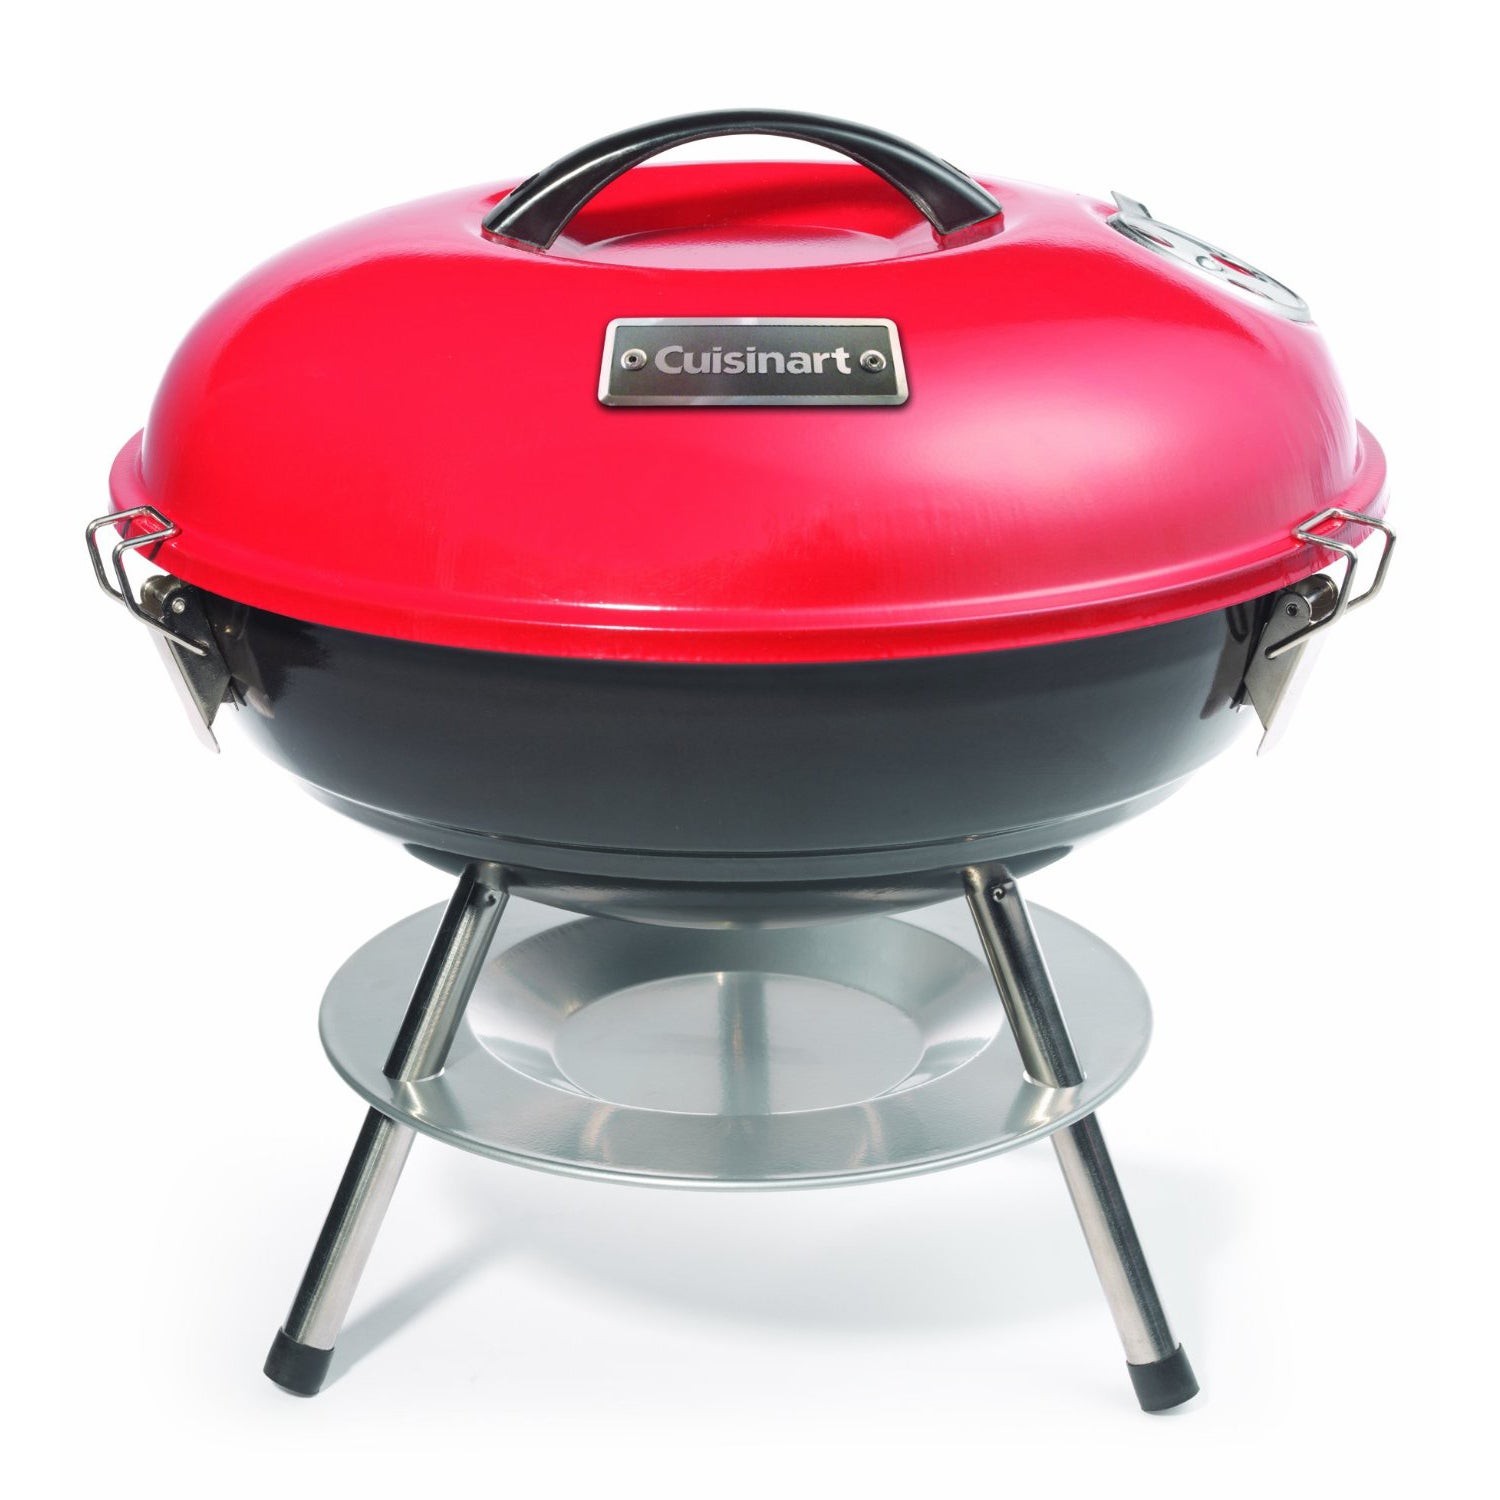 14" Charcoal Grill Red/Black